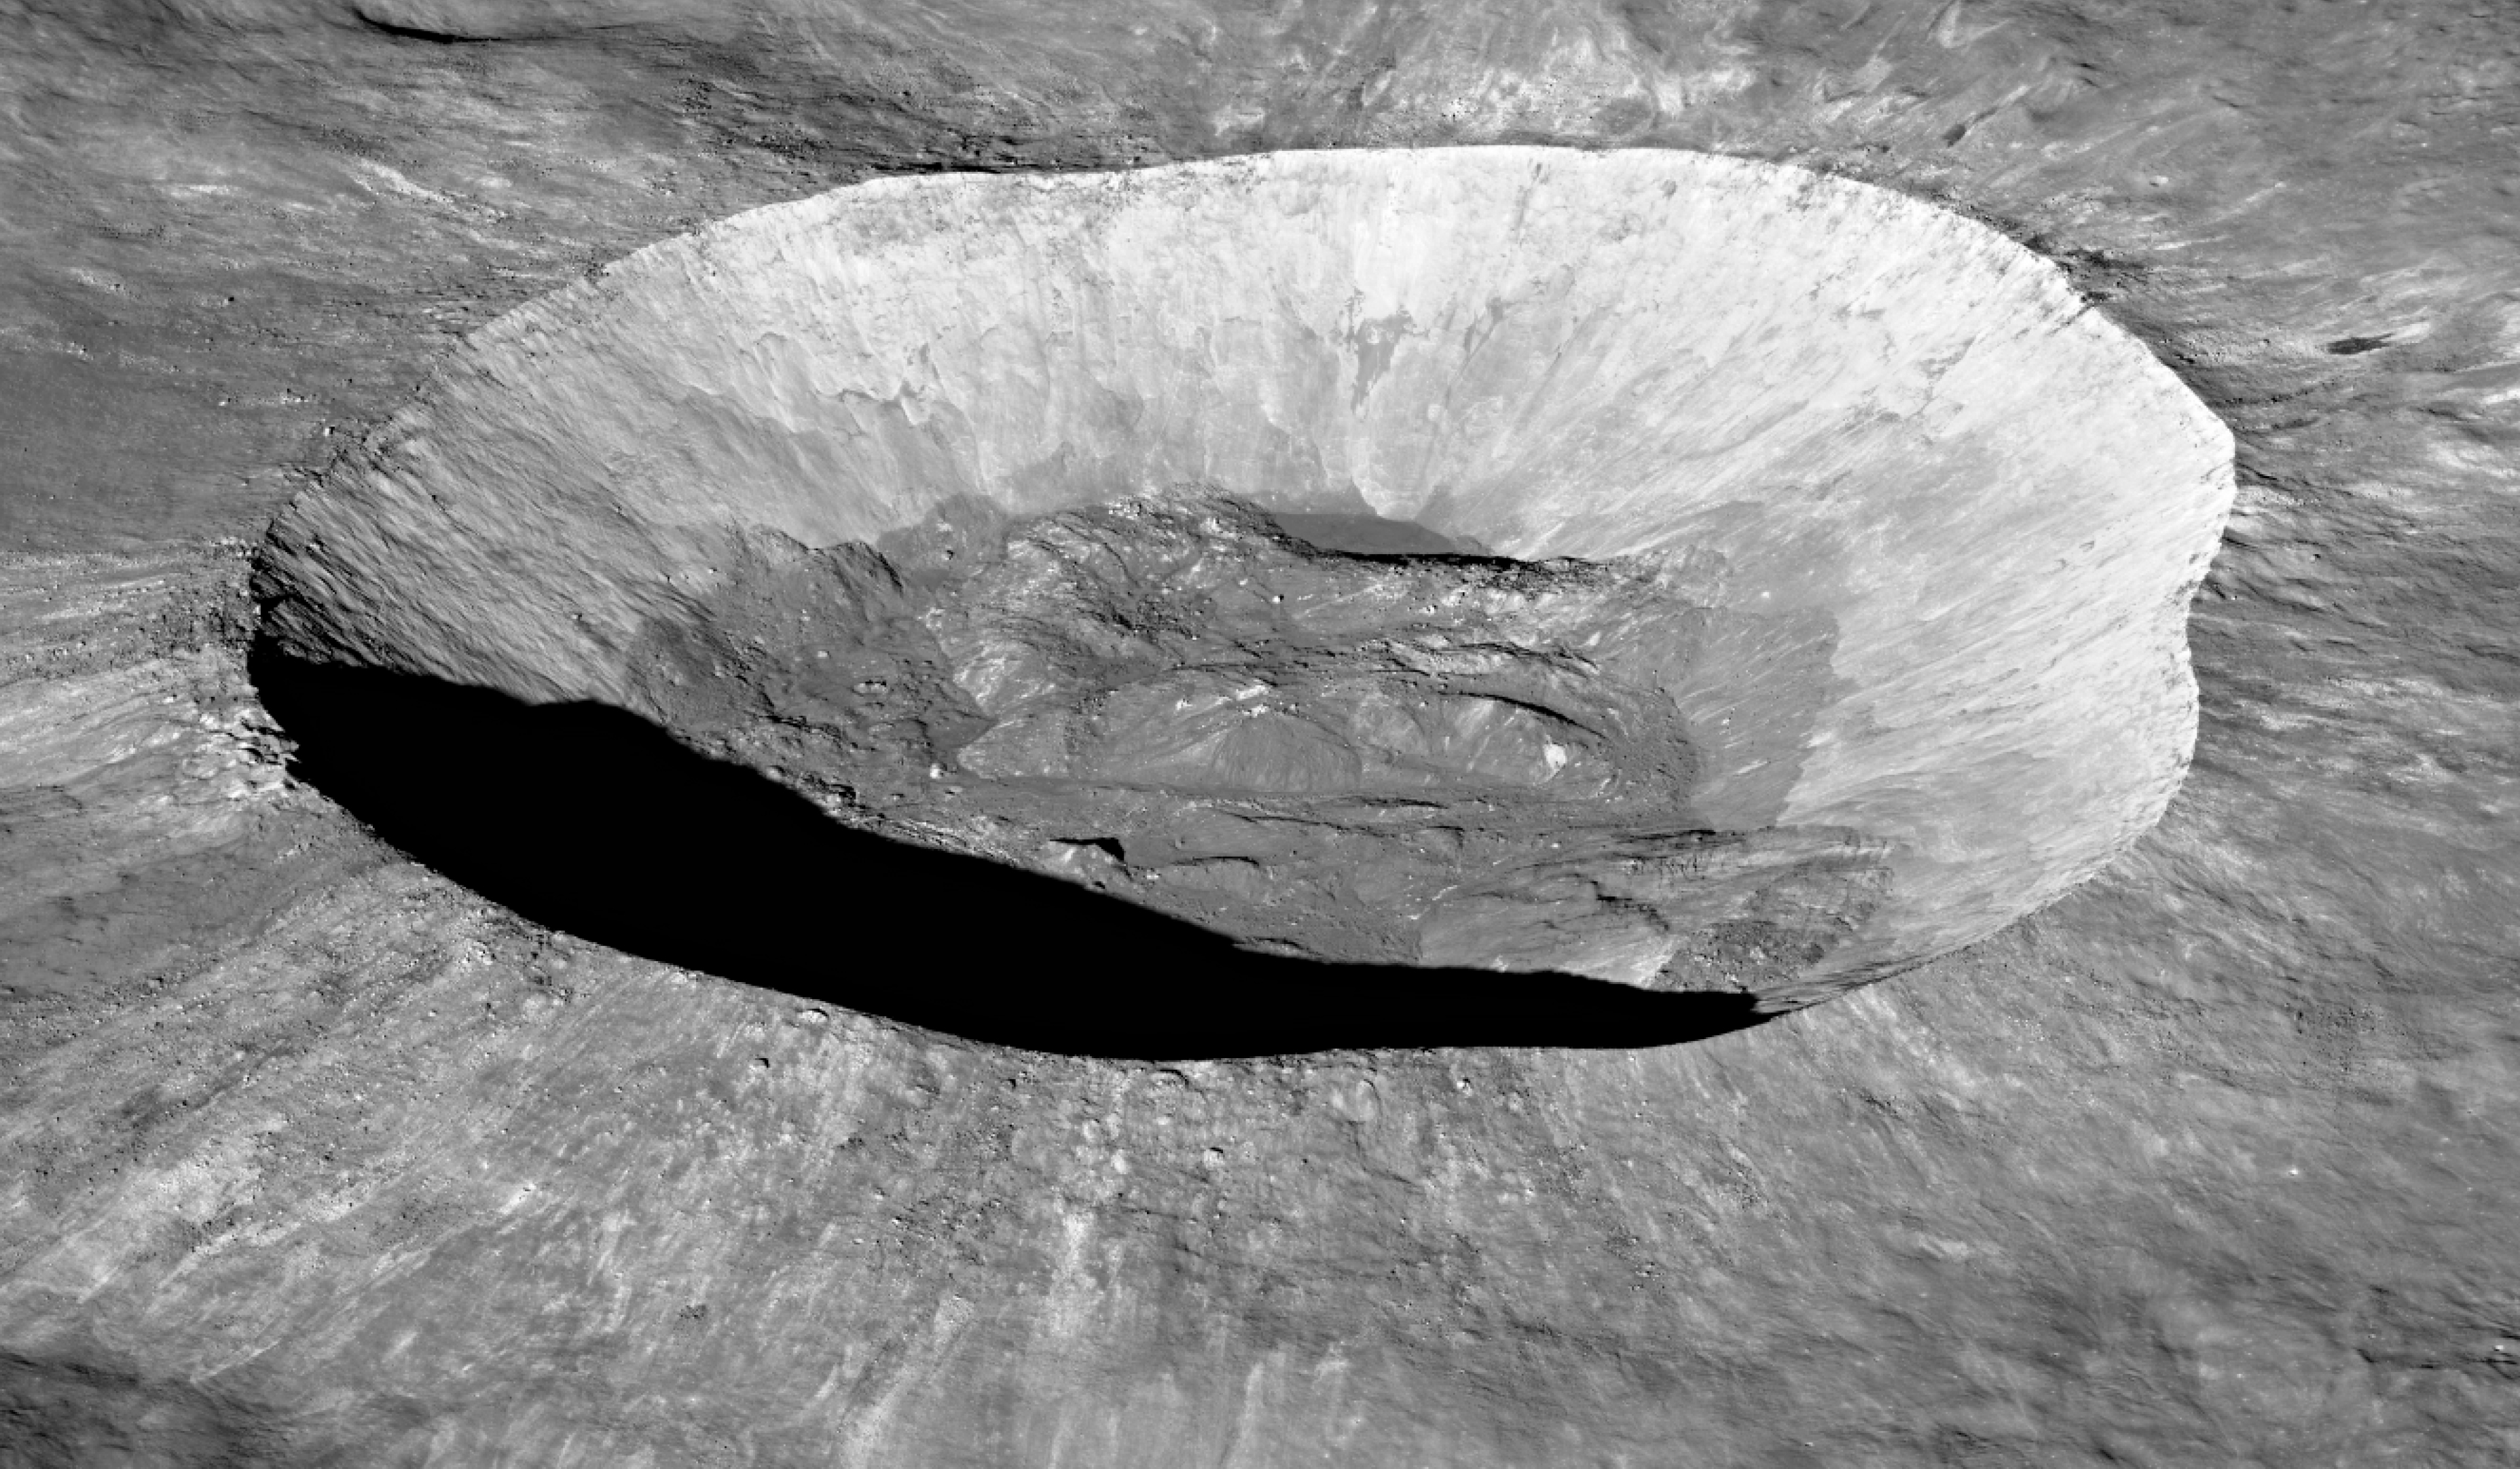 closeup black and white photo of a lunar crater